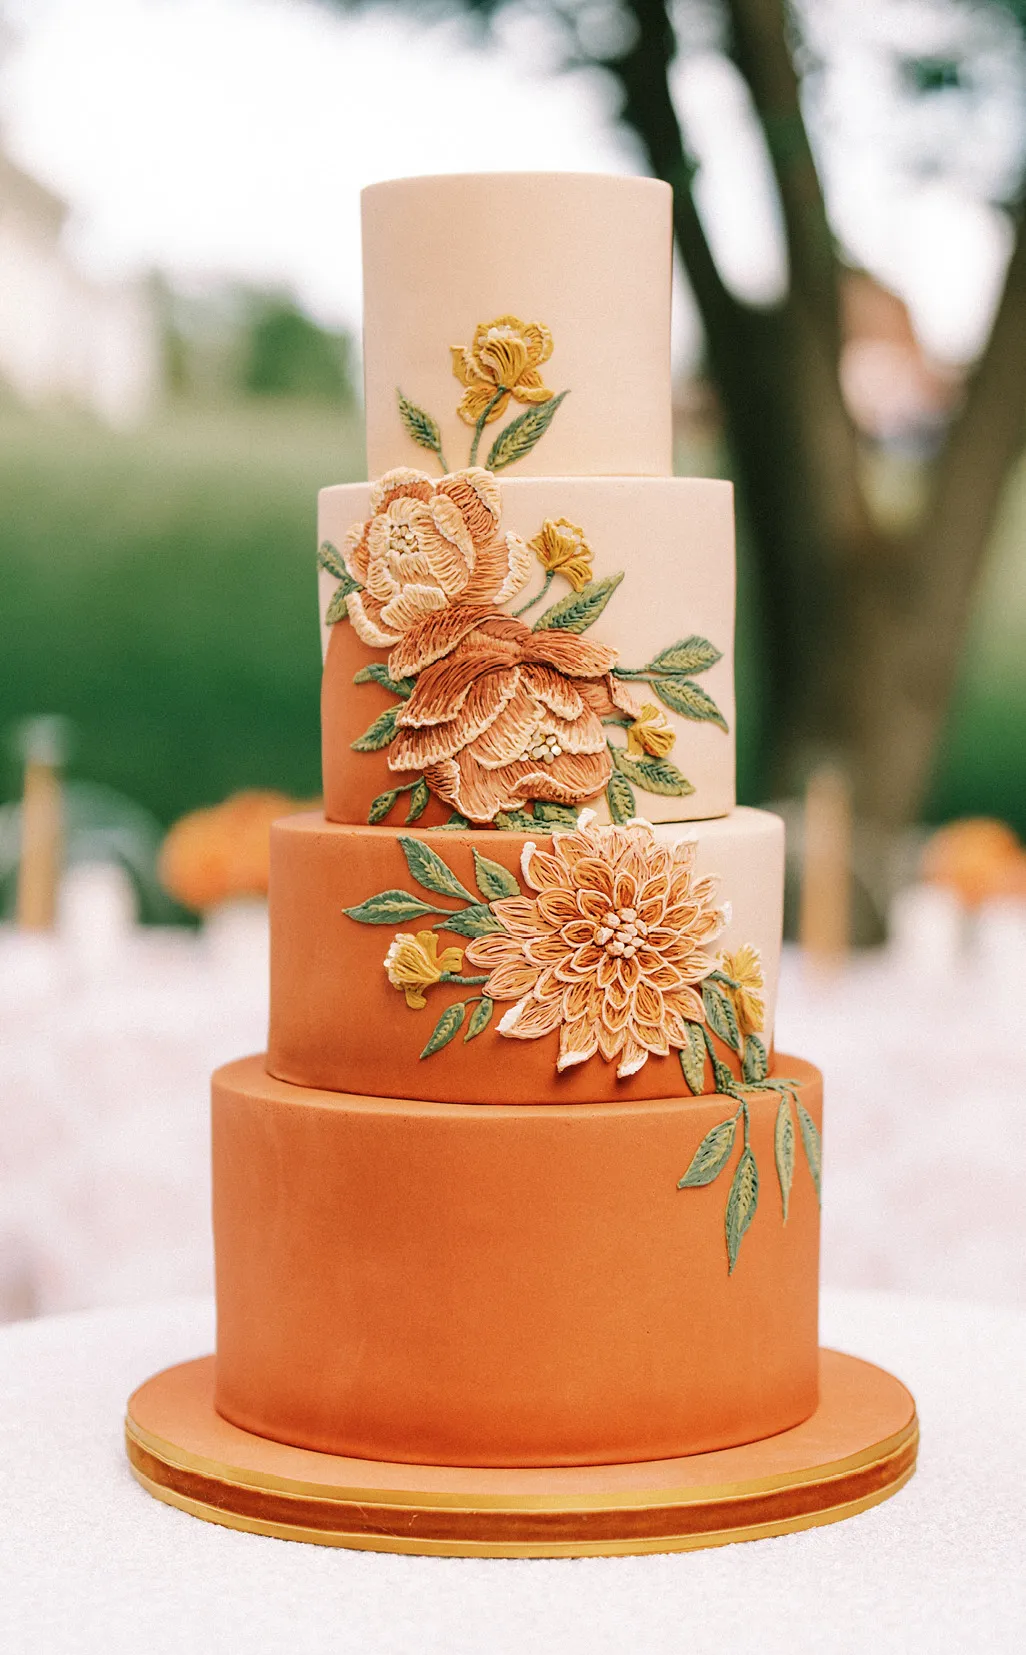 Four tiered orange and pink wedding cake with flowers